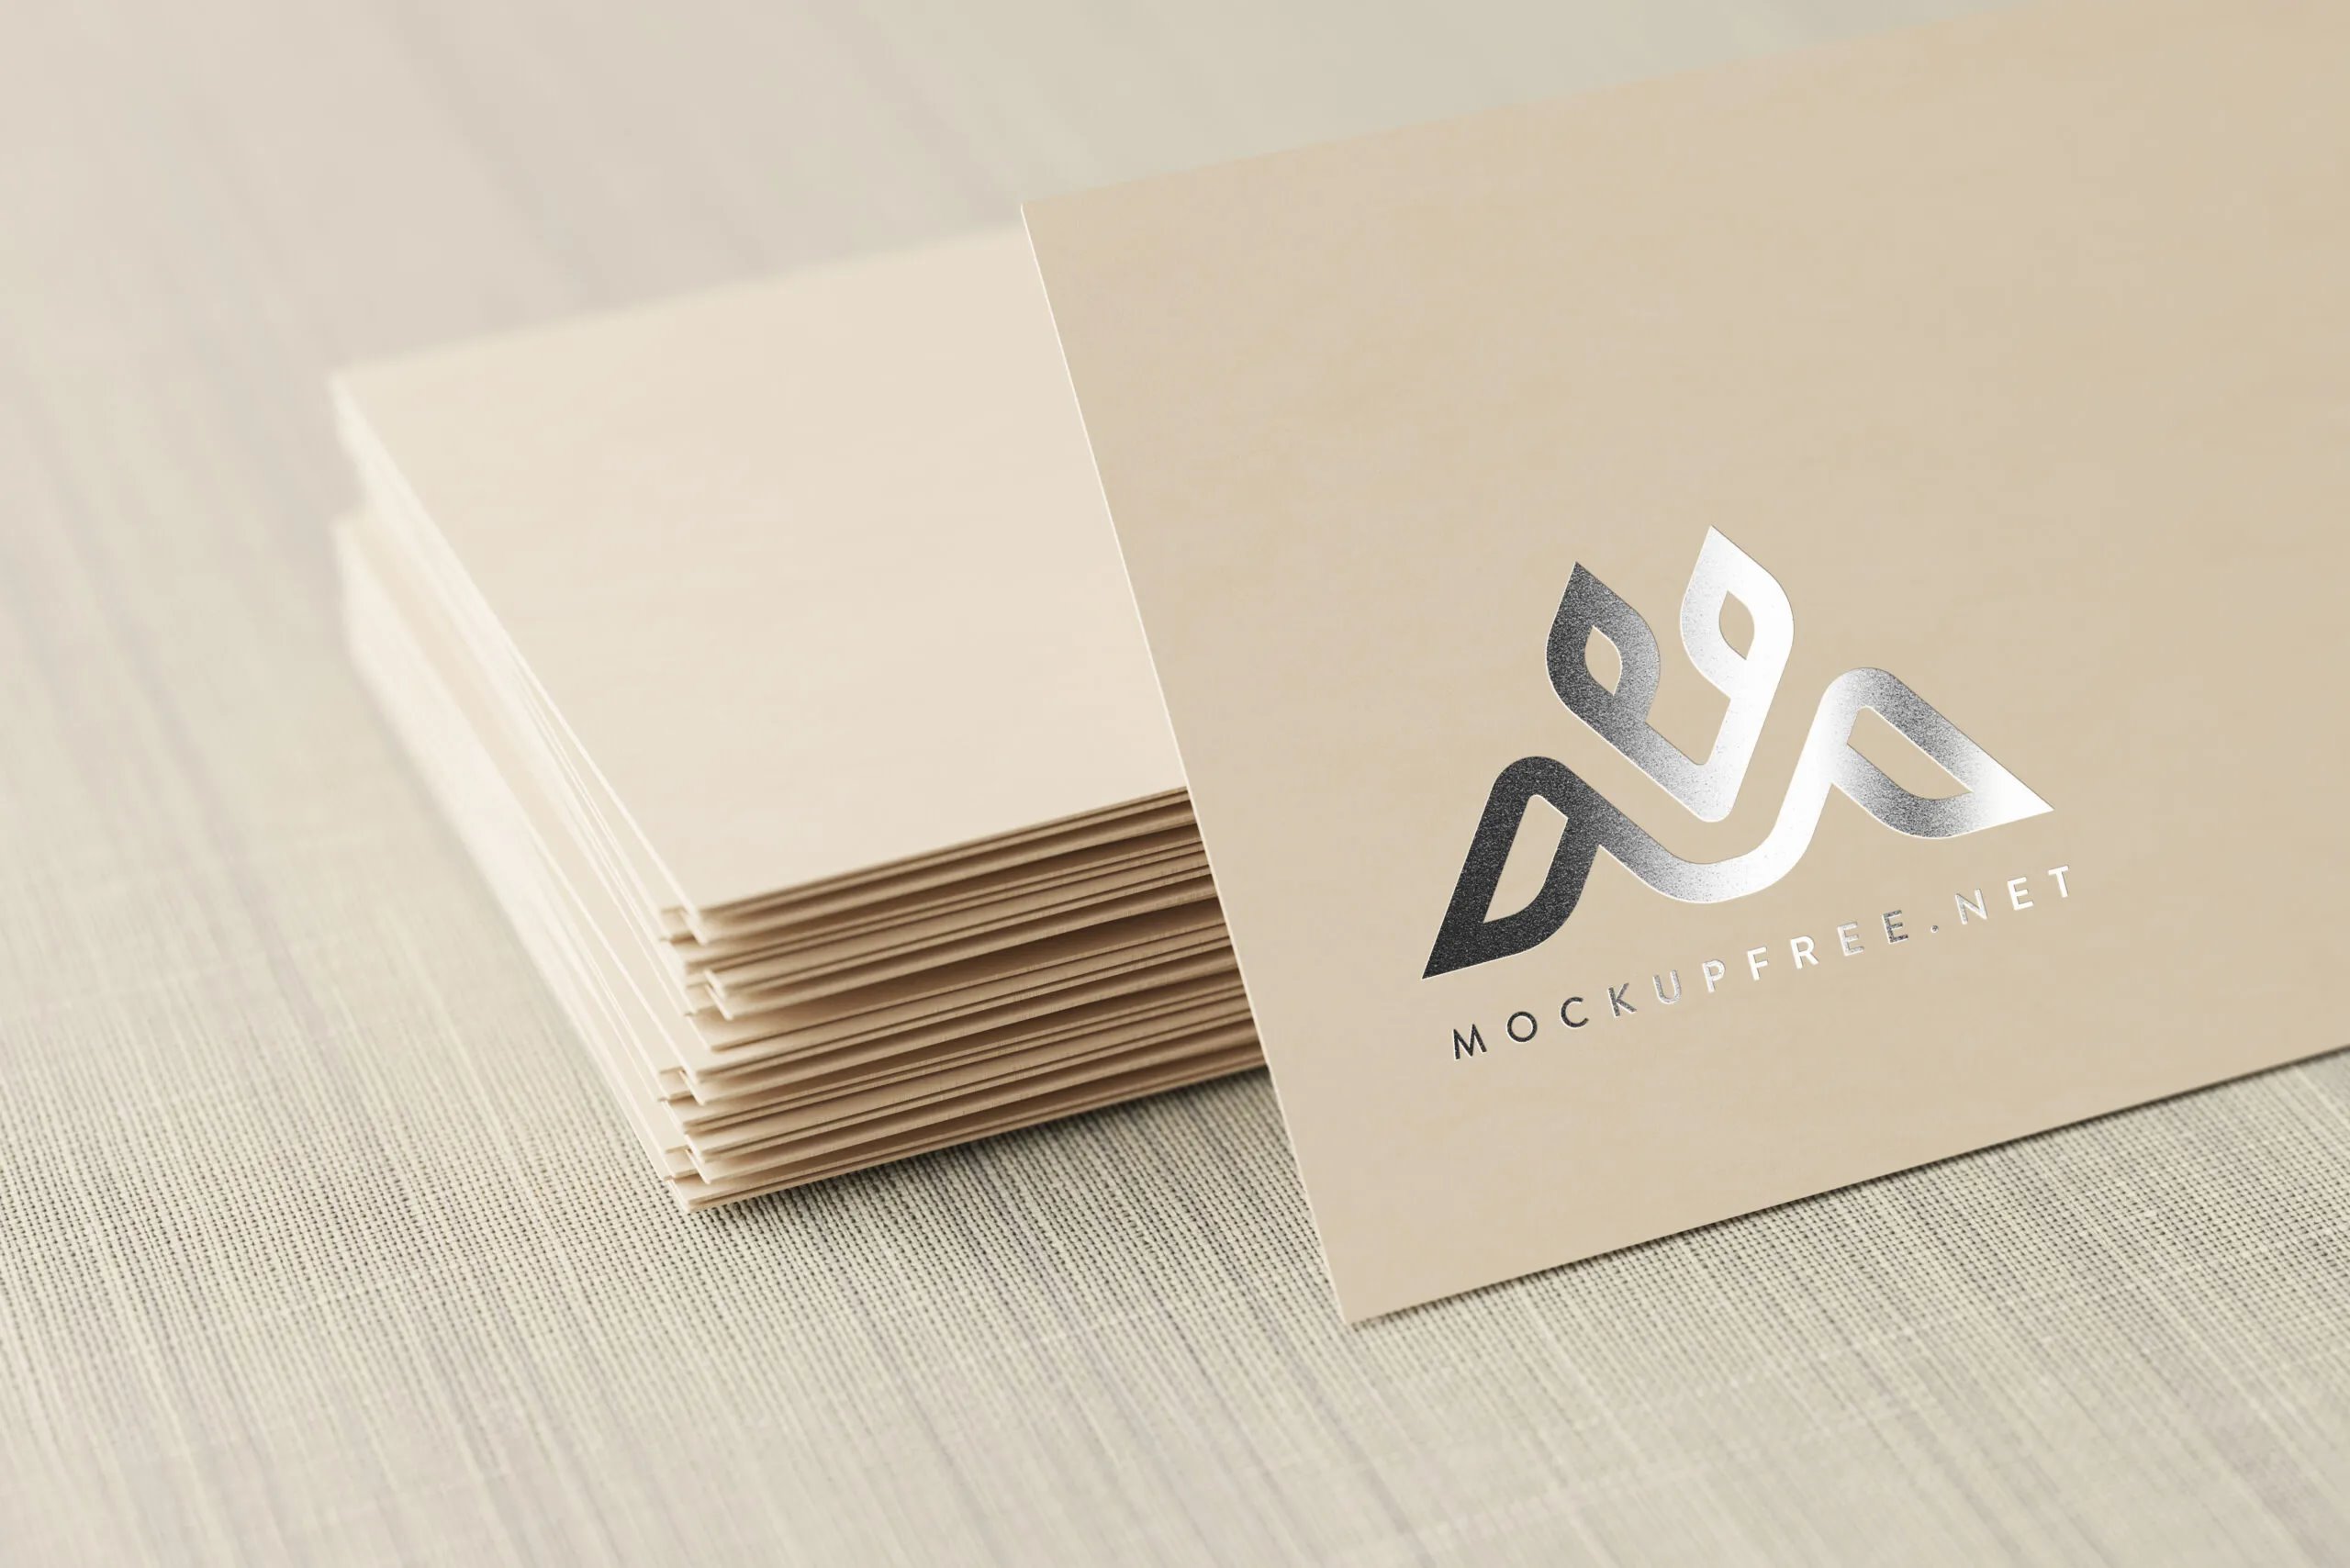 Logo on Card Mockup in Close-up View FREE PSD